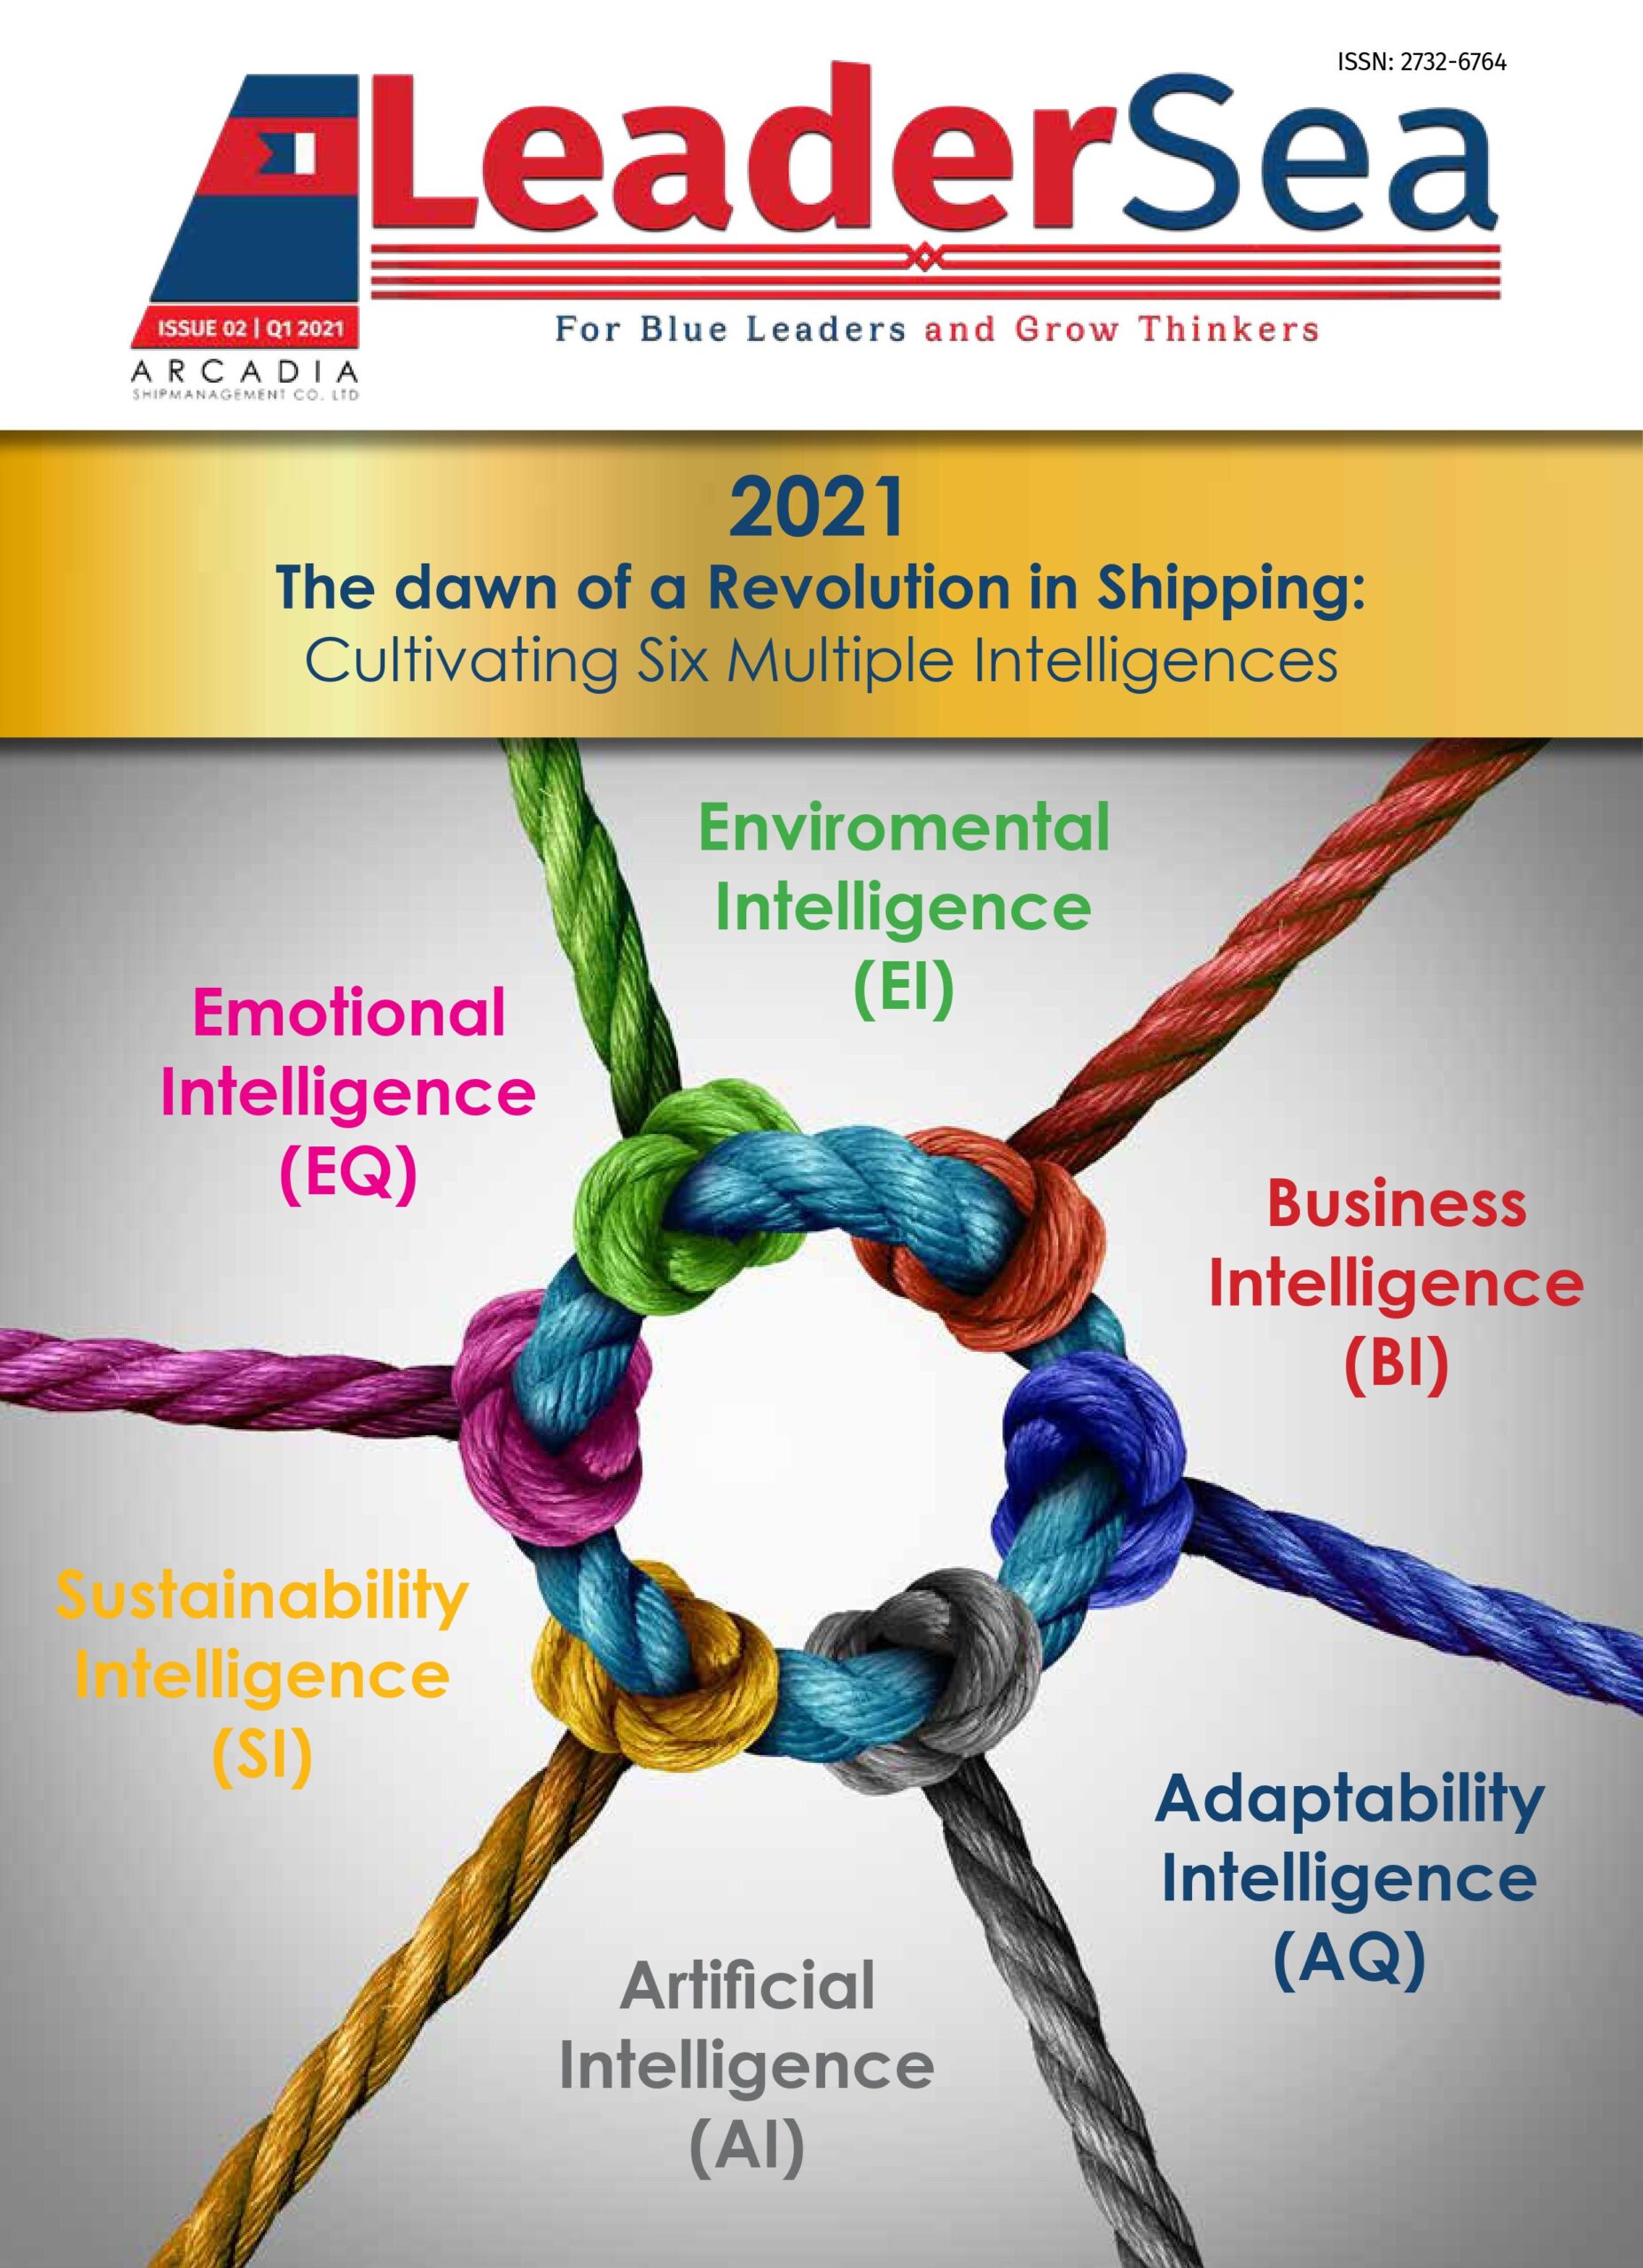 You are currently viewing LeaderSea Magazine – Arcadia Shipmanagement: 2021 The dawn of a Revolution in Shipping: Cultivating Six Multiple Intelligences